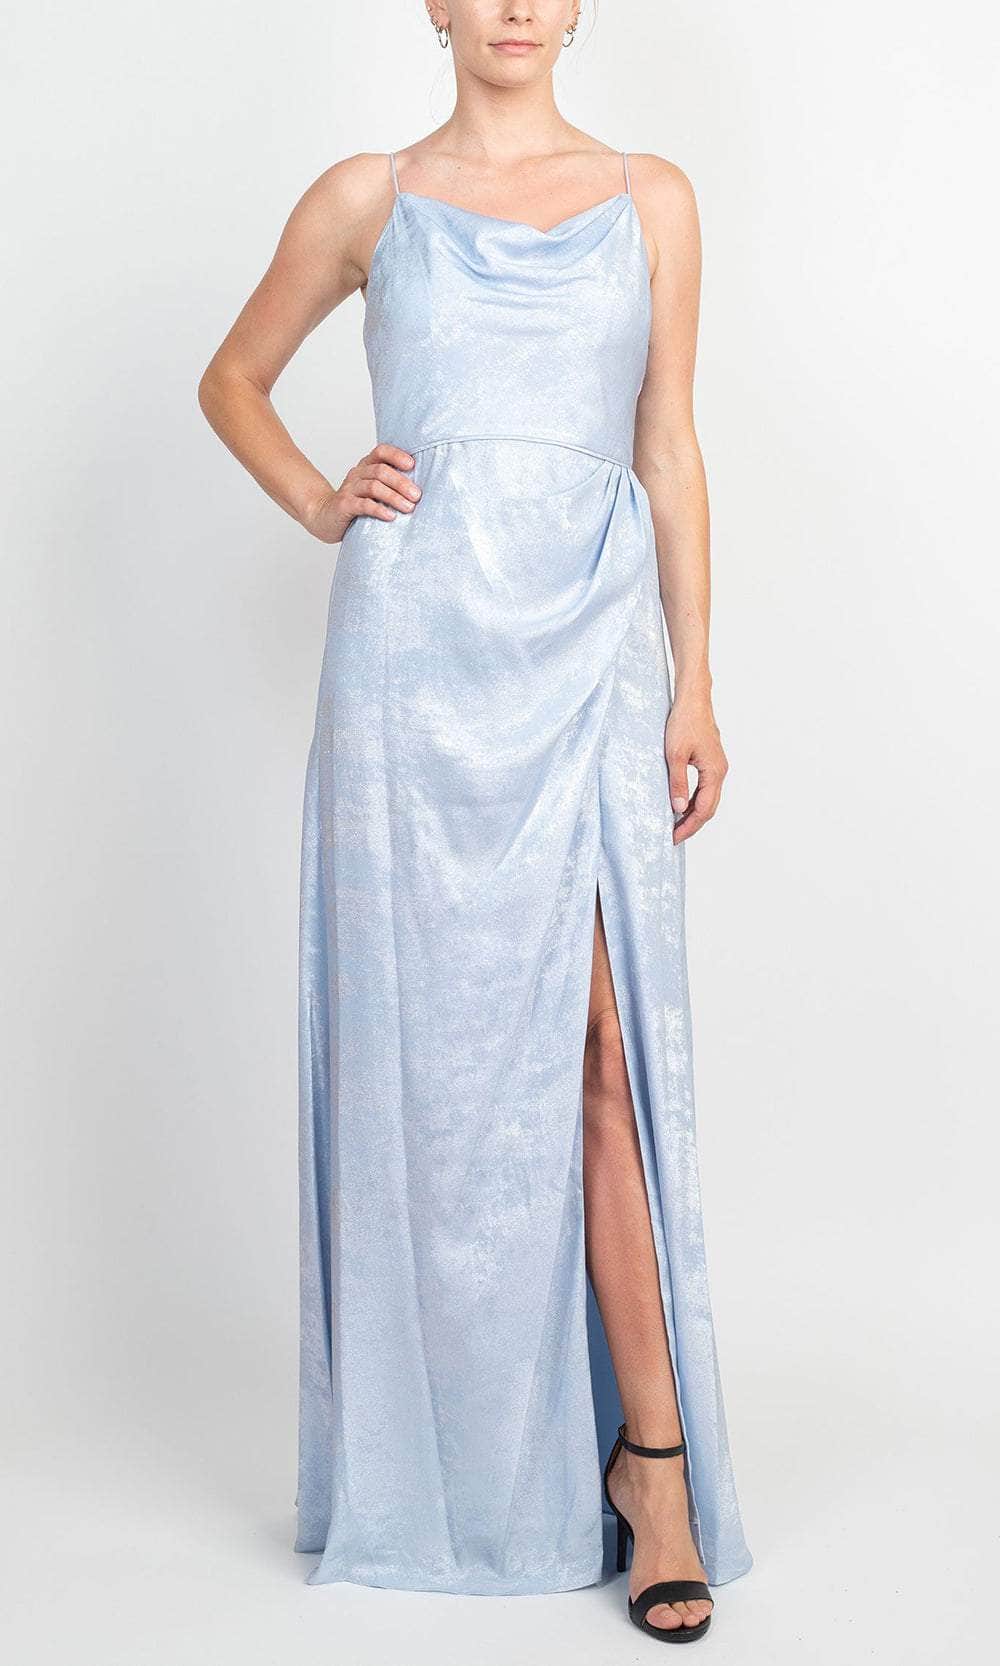 Image of Adrianna Papell AP1E208881 - Metallic Cowl Neck Evening Gown